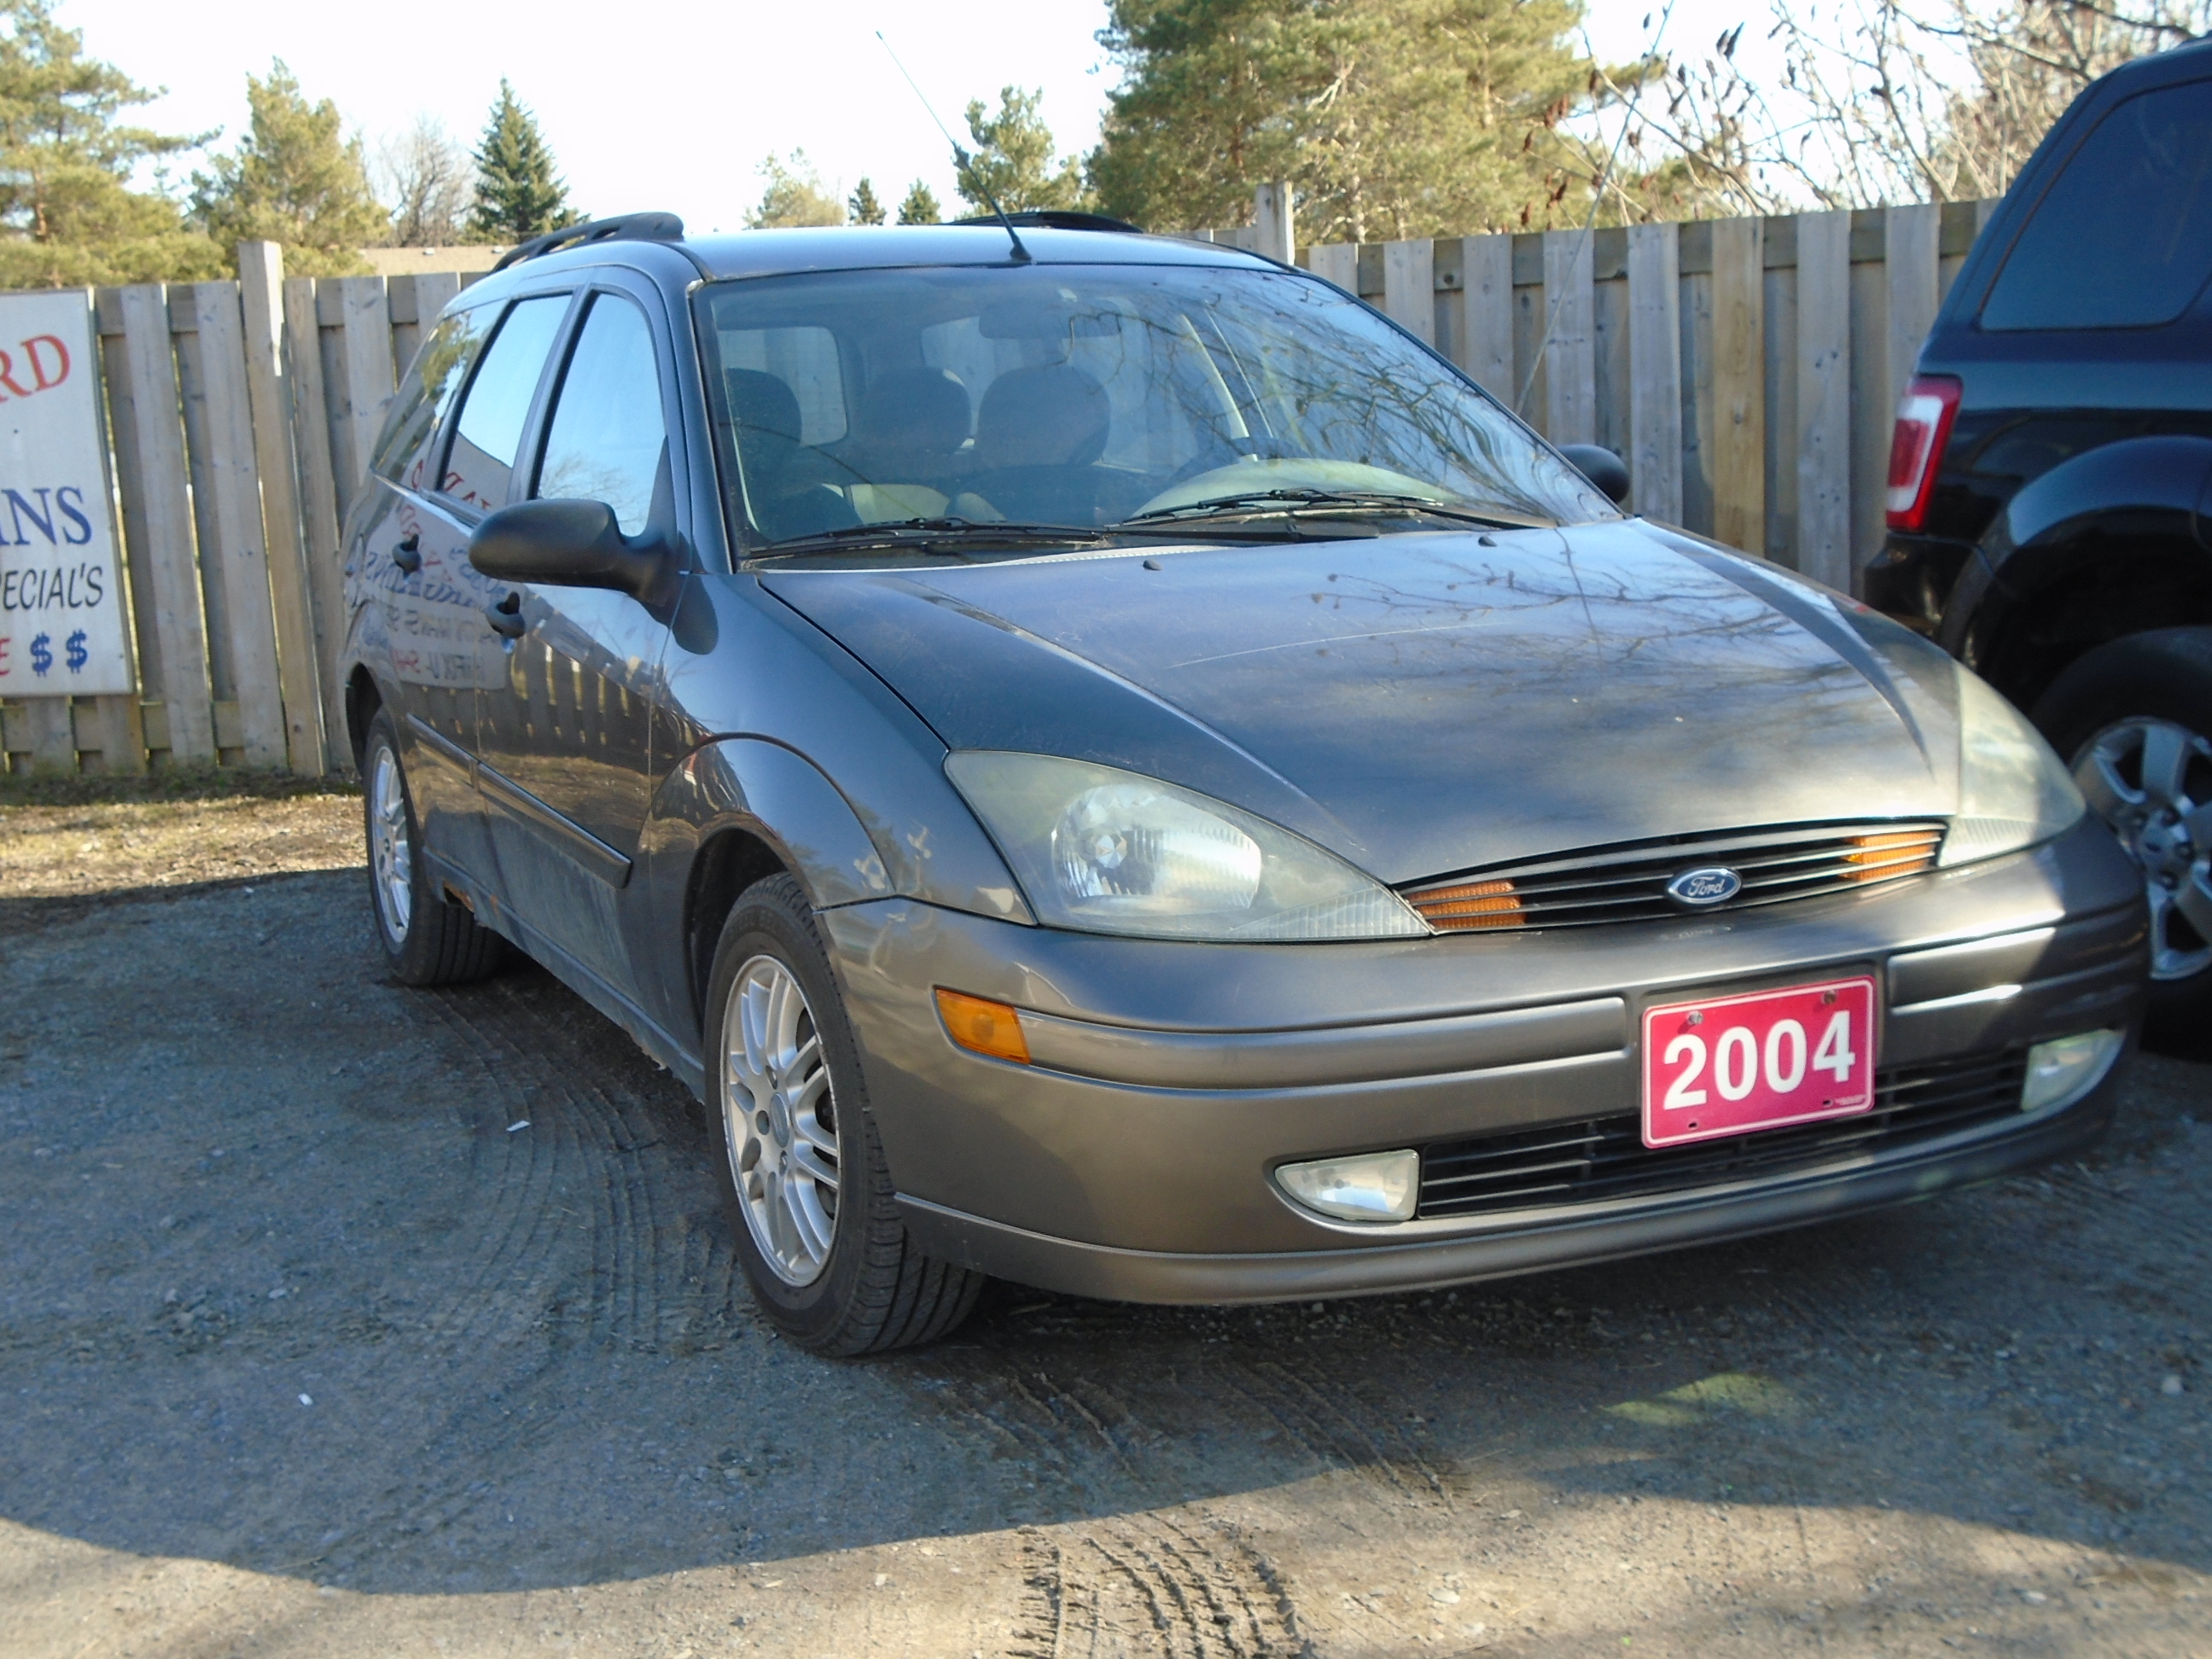 2004 Ford focus wagon tires #4